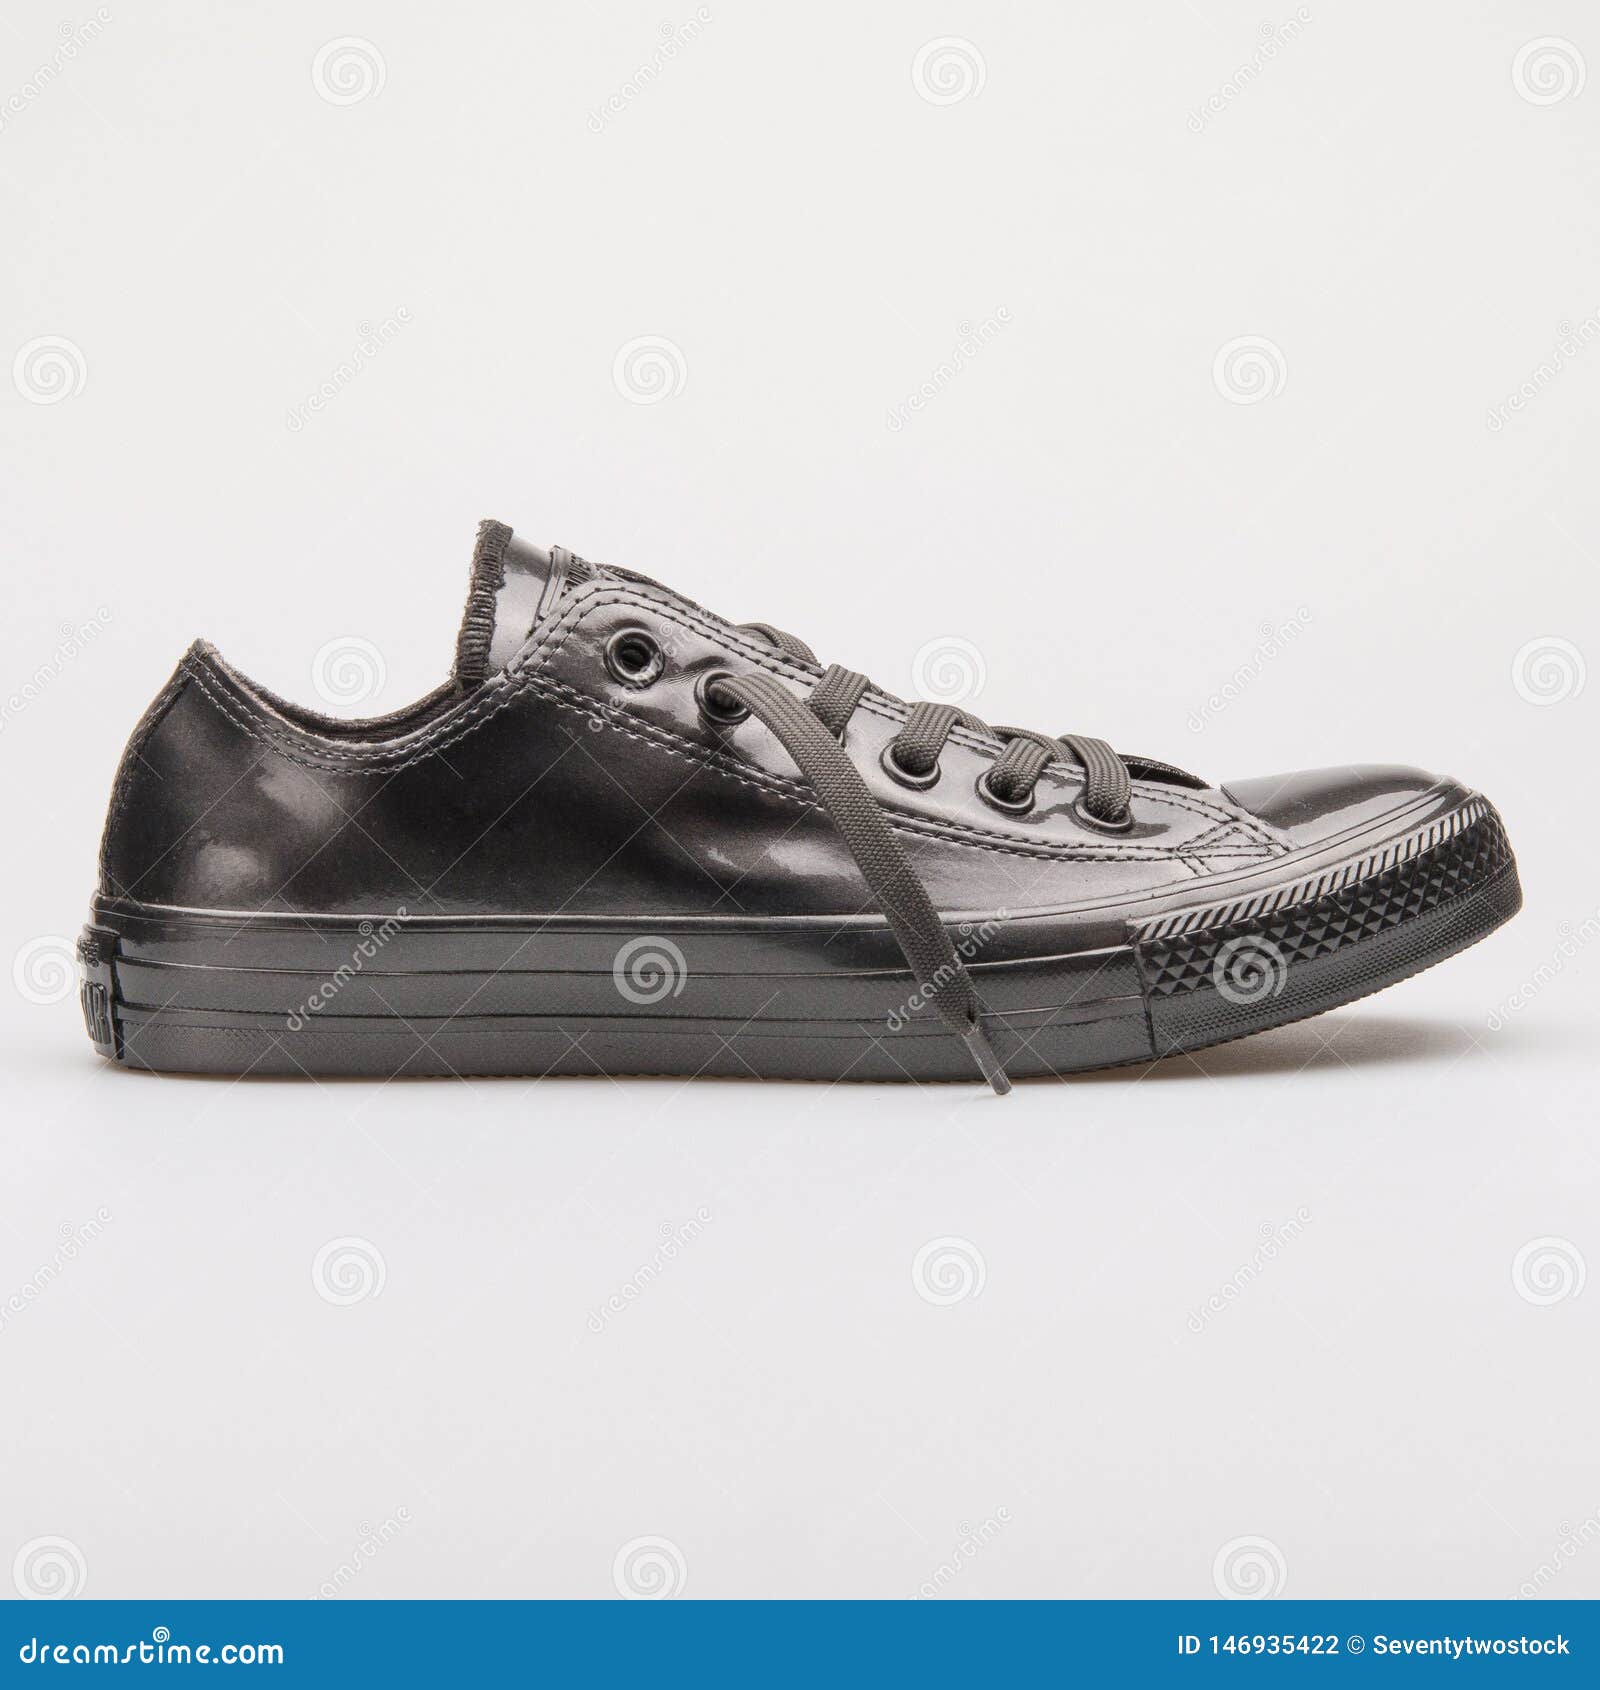 Converse Chuck Taylor All Star Metallic Rubber OX Black Pearl Sneaker  Editorial Photography - Image of shoes, accessories: 146935422